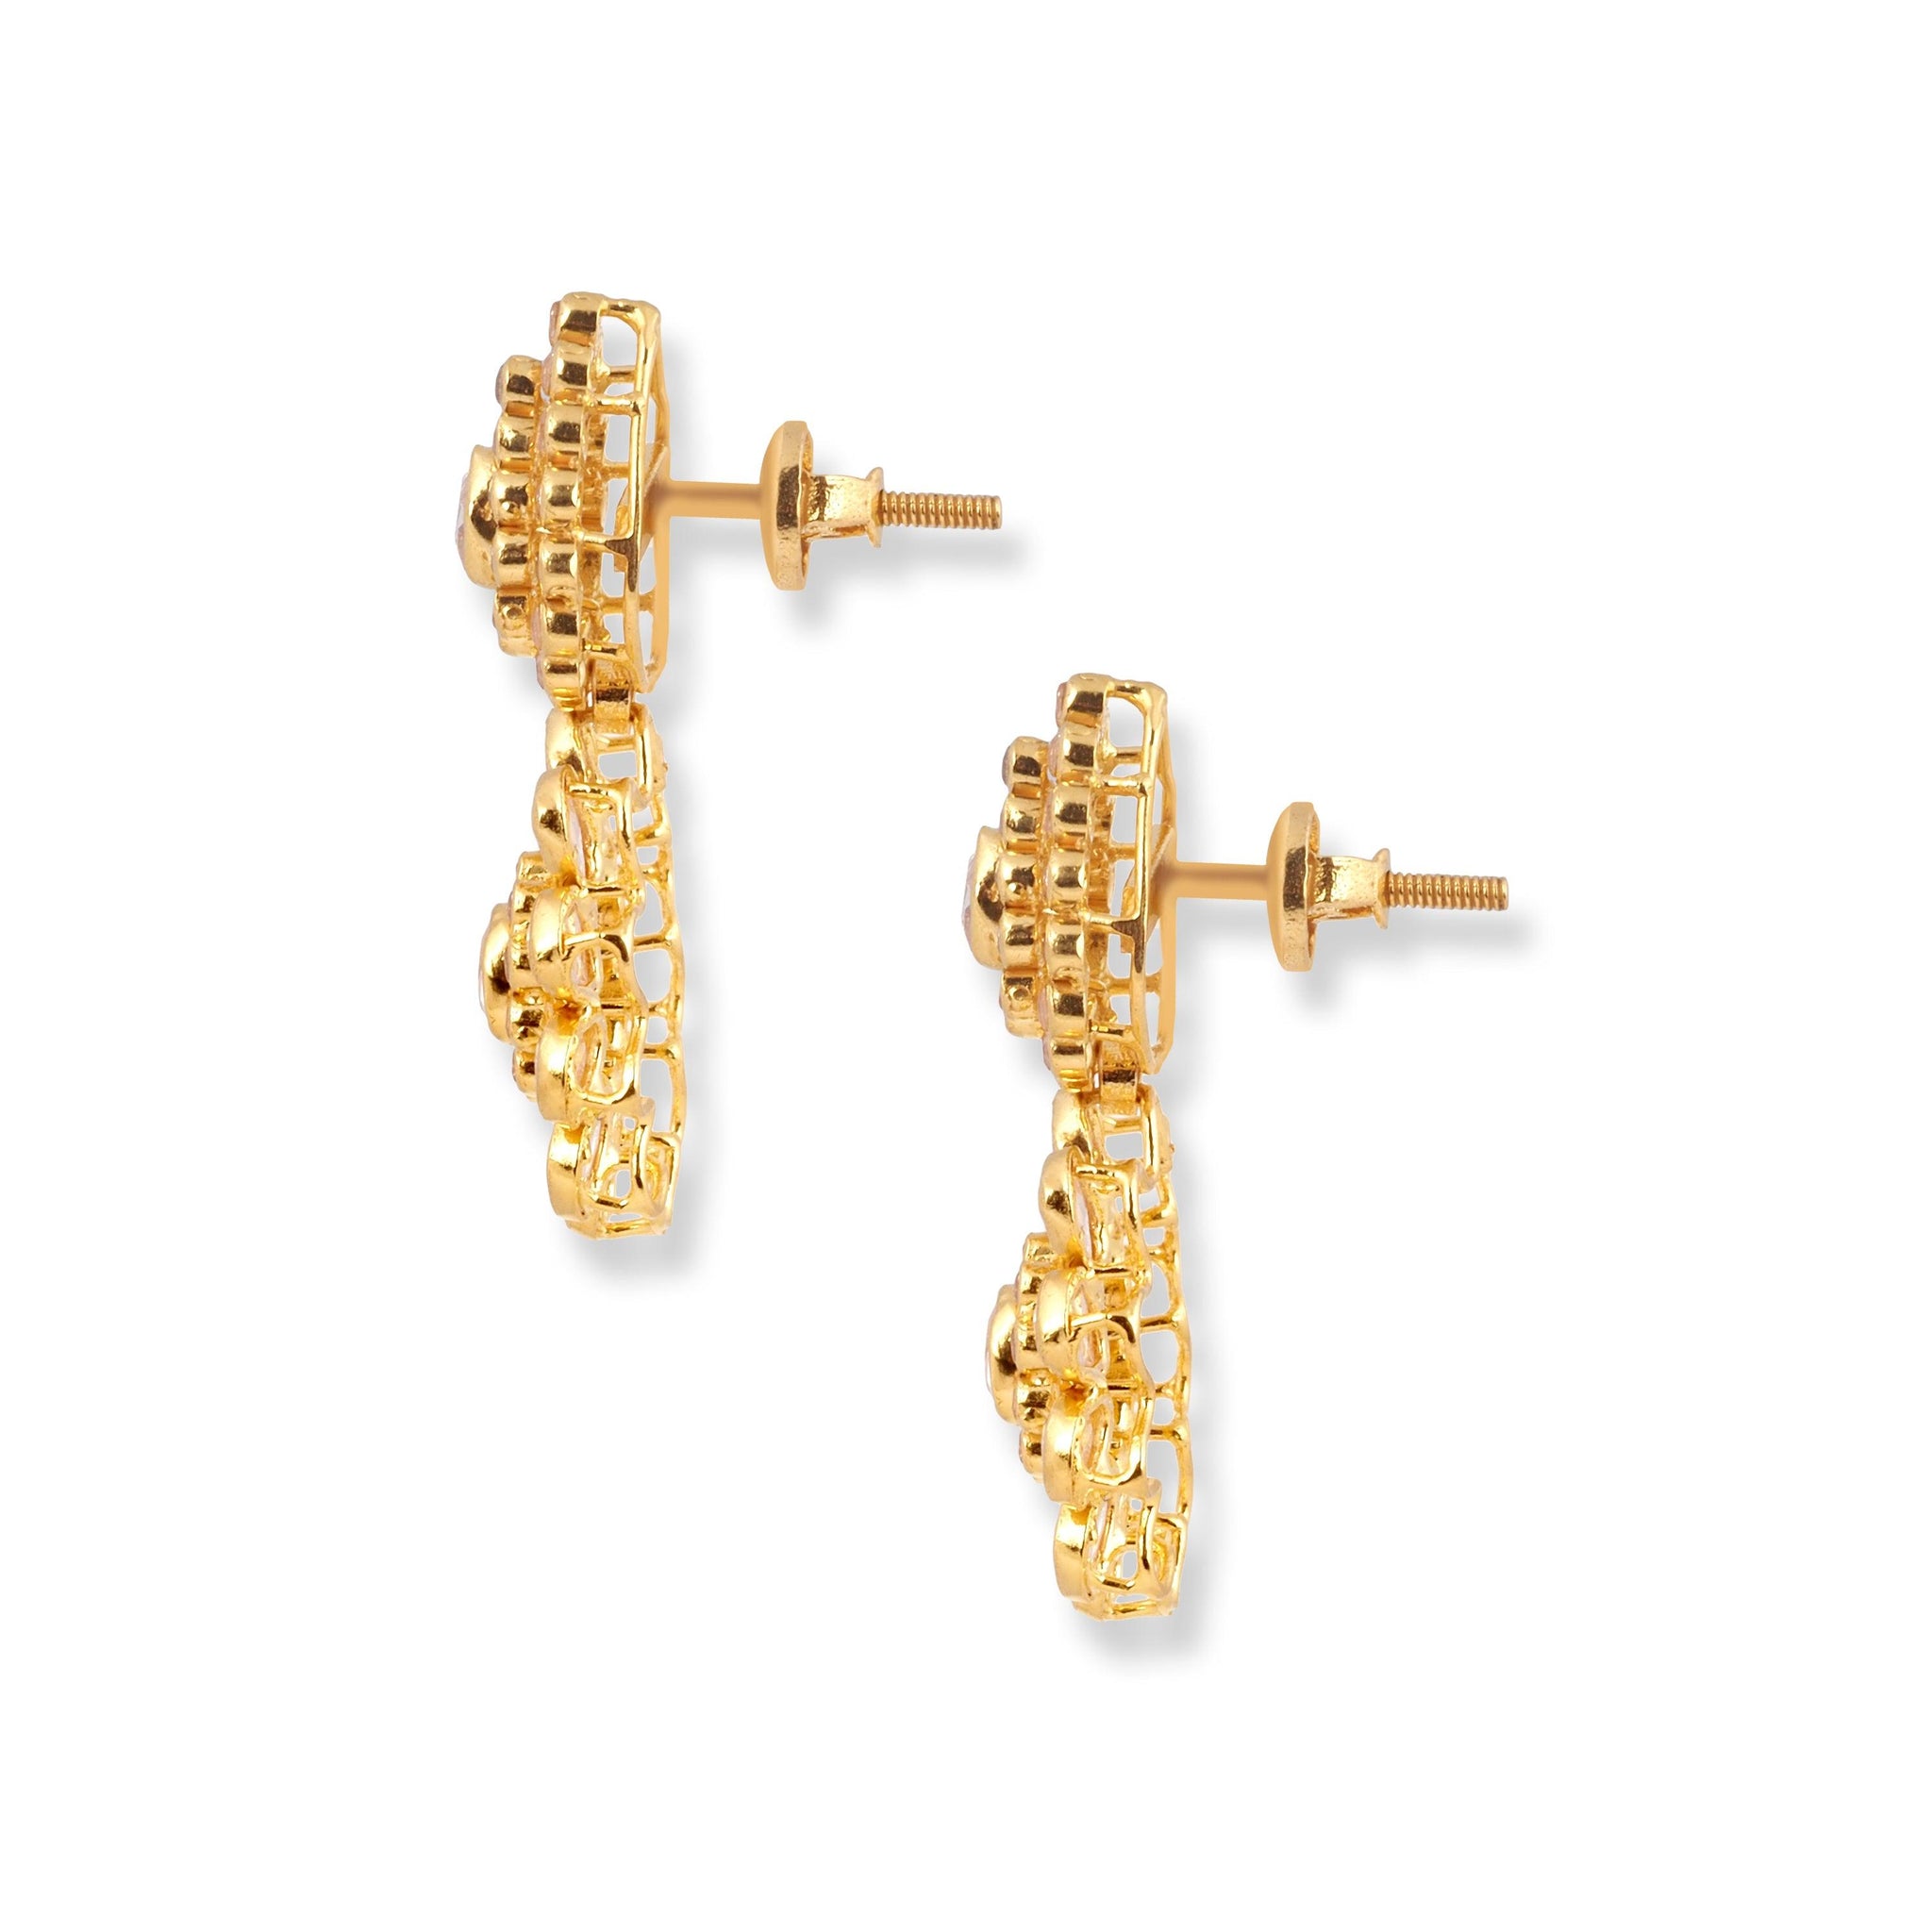 22ct Yellow Gold Necklace & Earrings with Polki Style Cubic Zirconia Stones